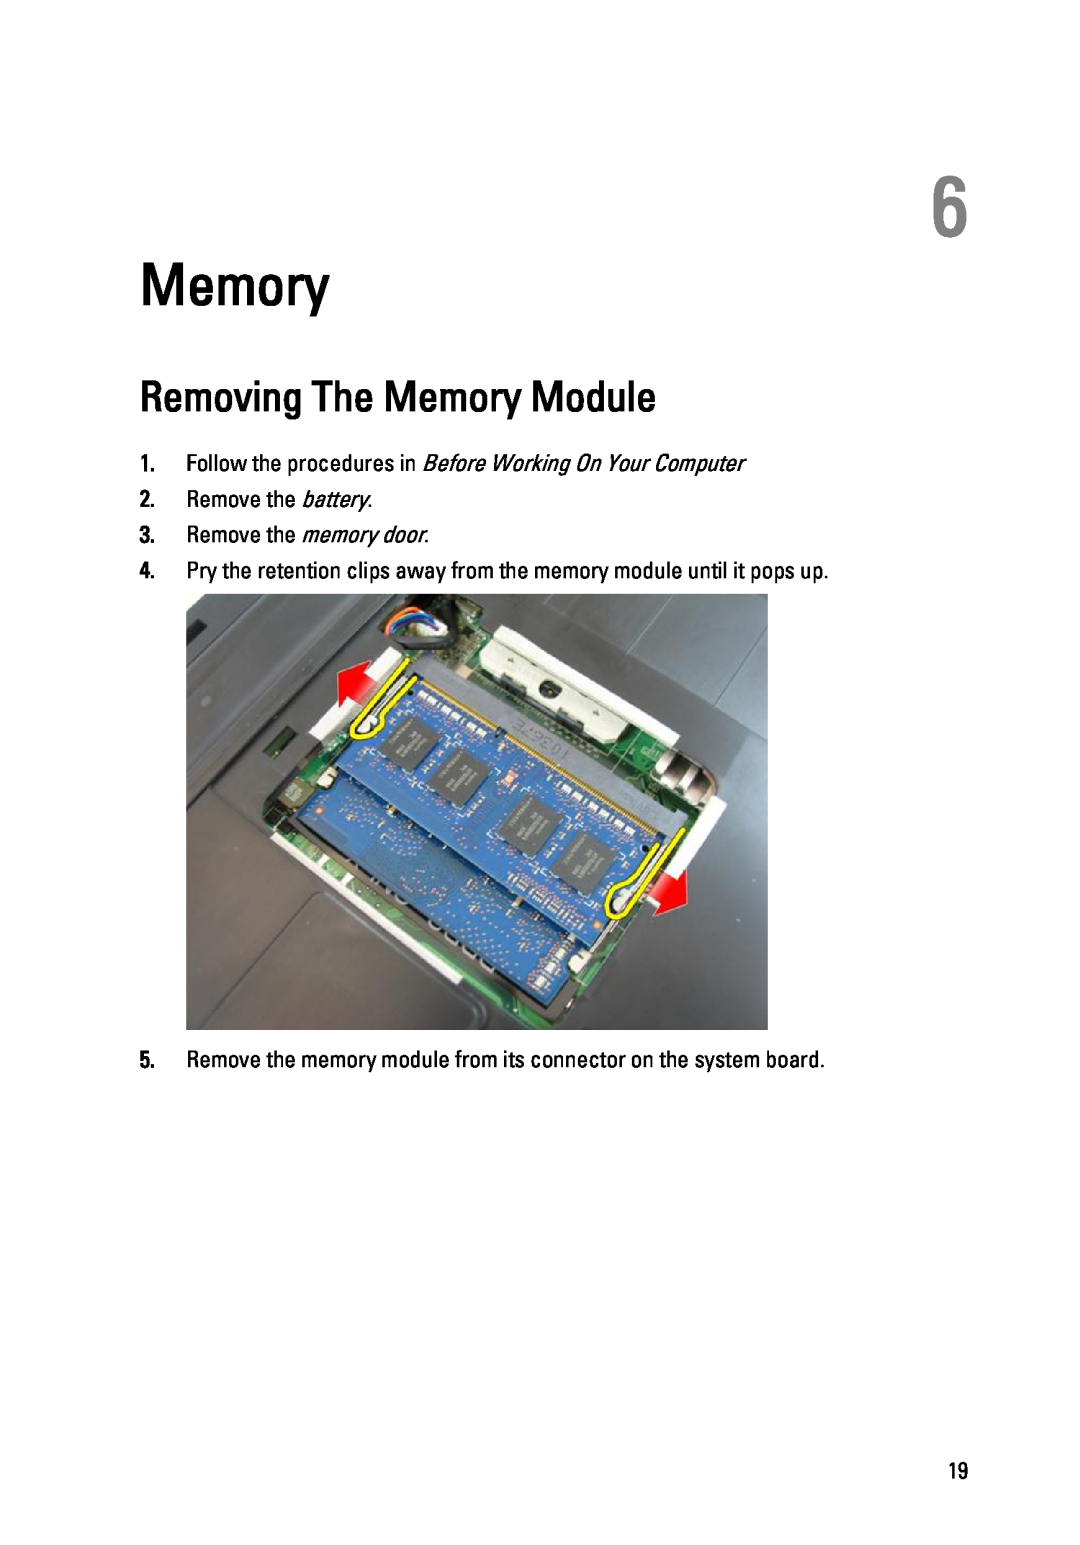 Dell 3450 owner manual Removing The Memory Module, Remove the battery 3. Remove the memory door 